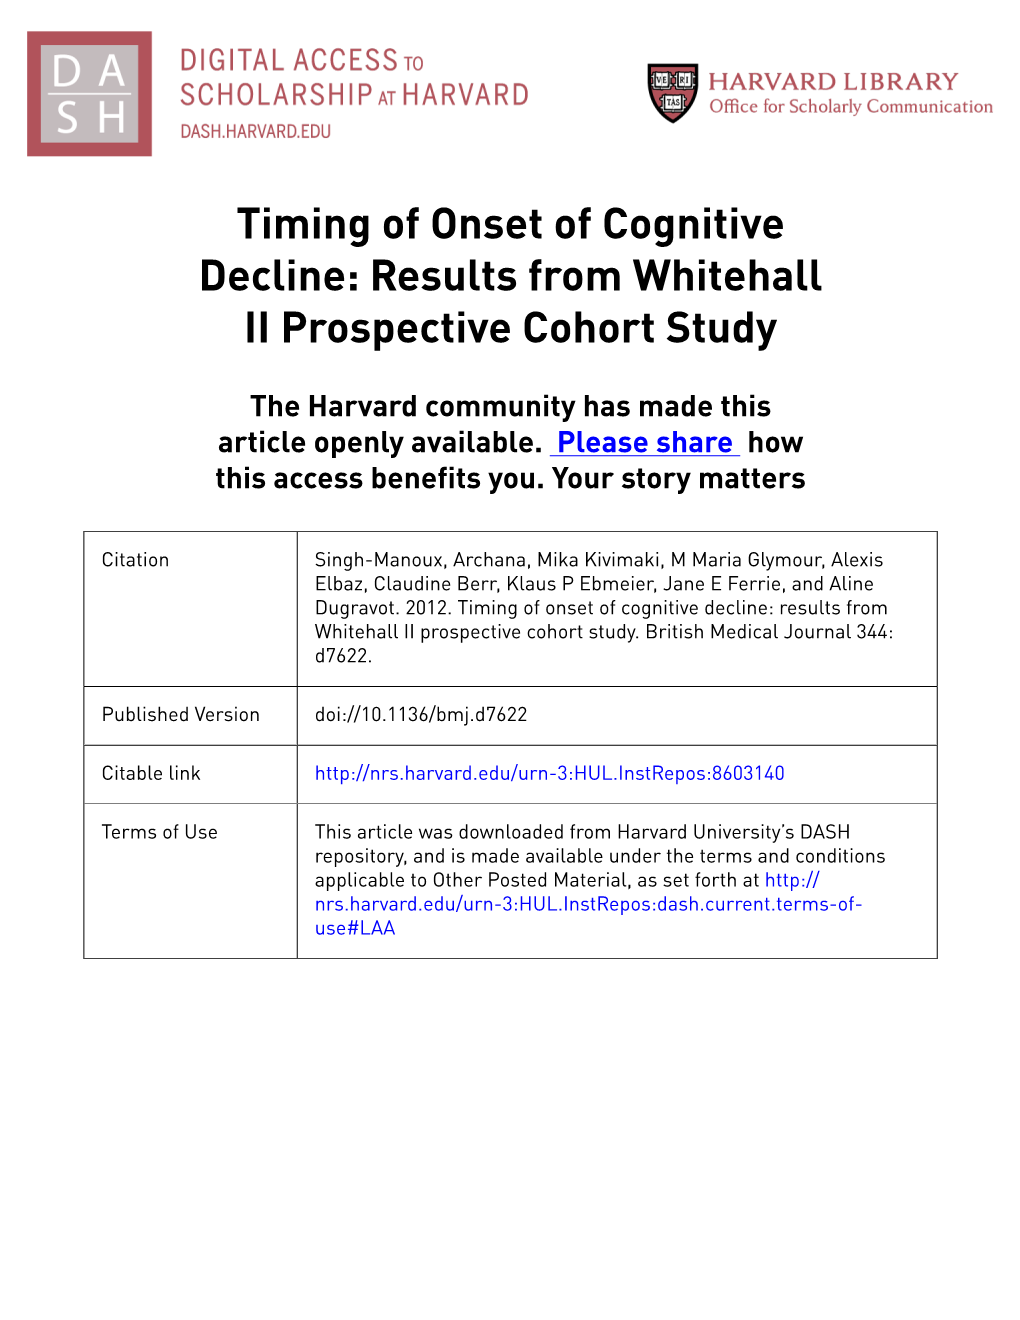 Timing of Onset of Cognitive Decline: Results from Whitehall II Prospective Cohort Study